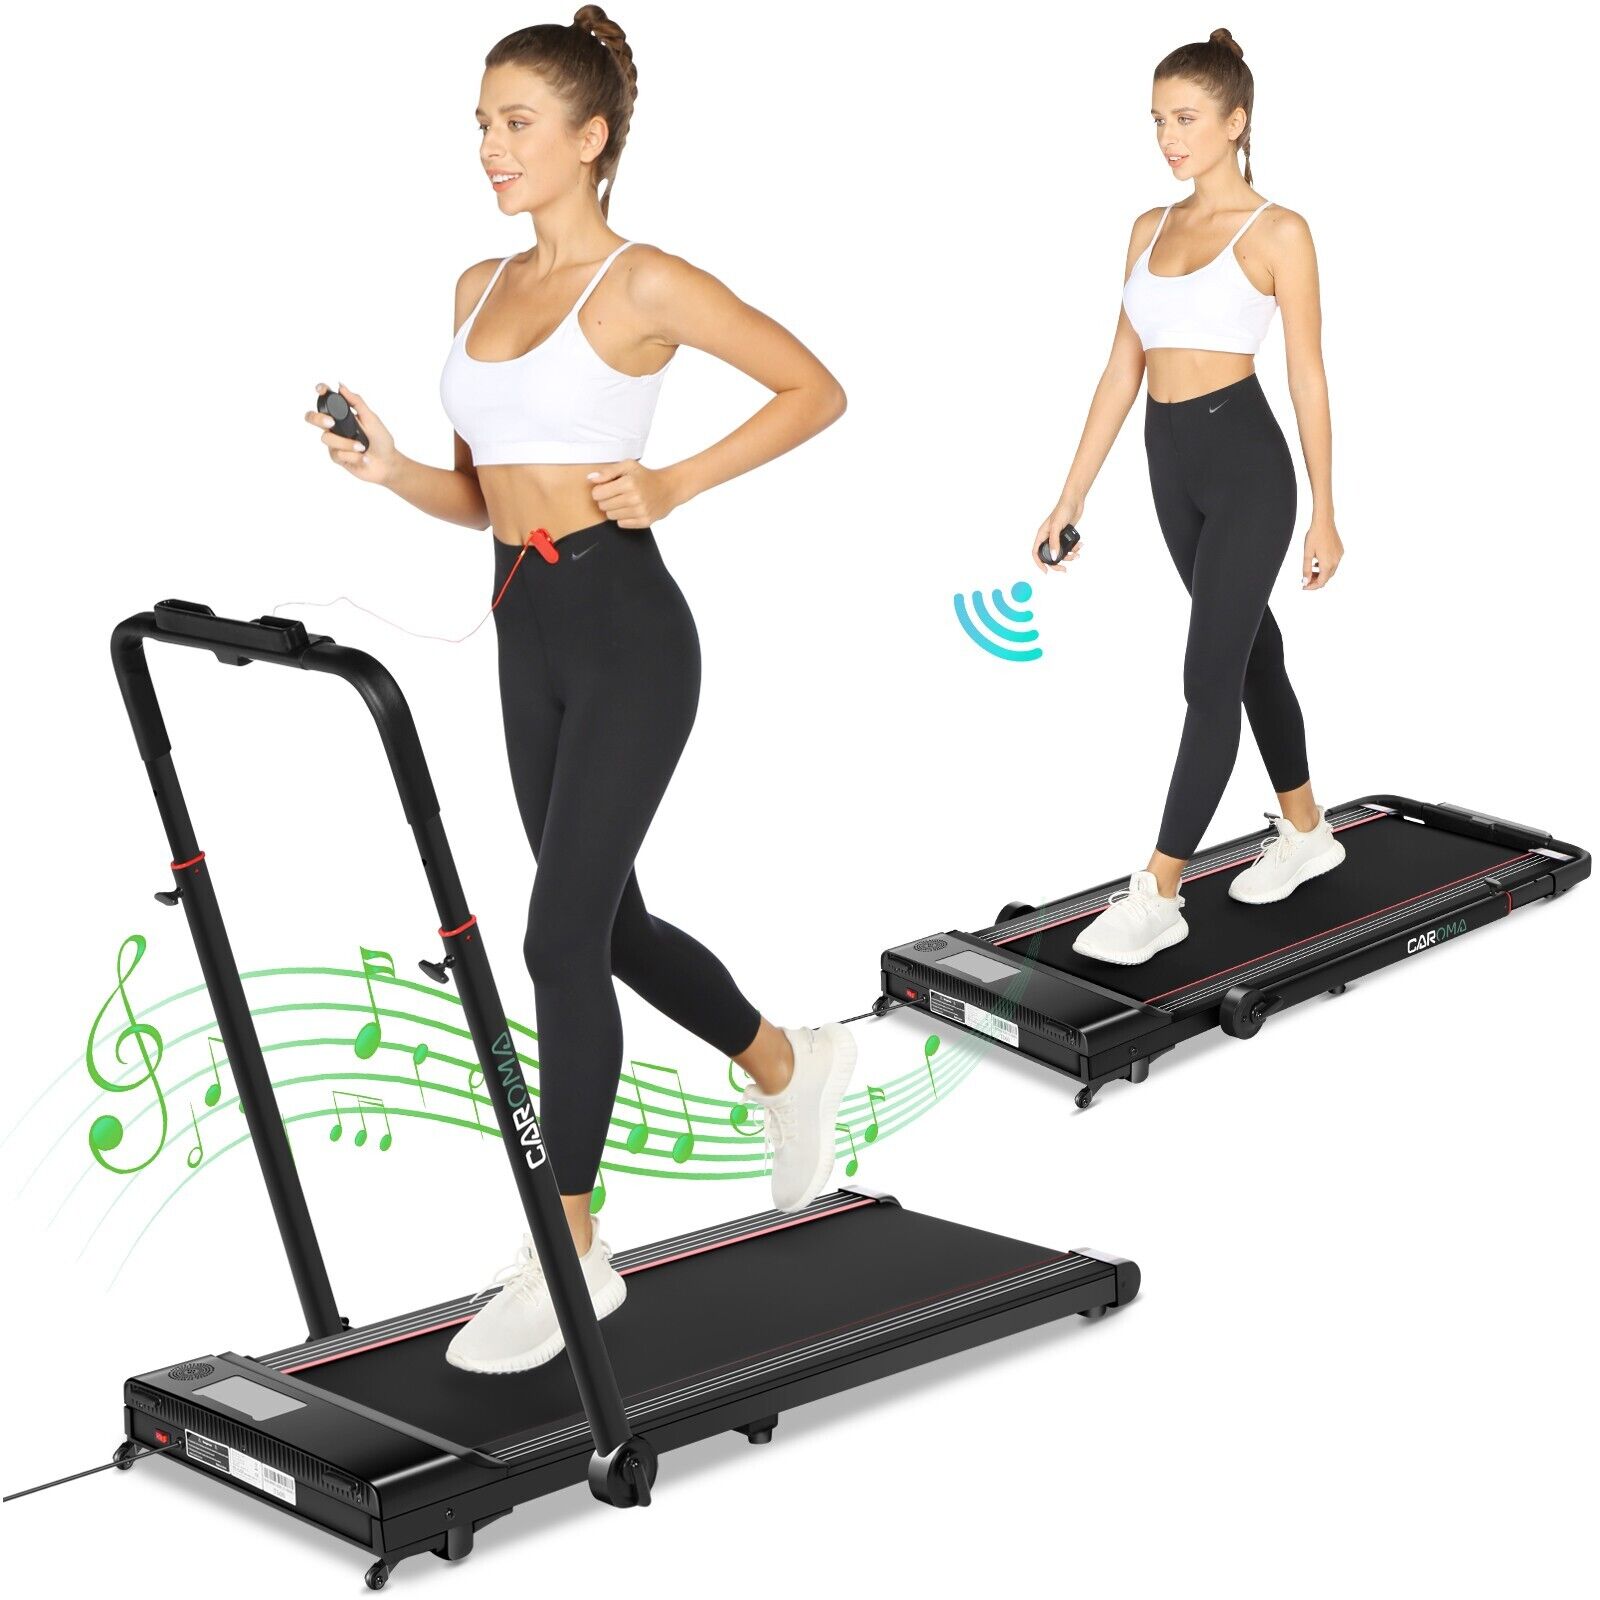 Tapis roulant elettrico con display LED 12km/h attrezzatura fitness cyclette Bluetooth 110K